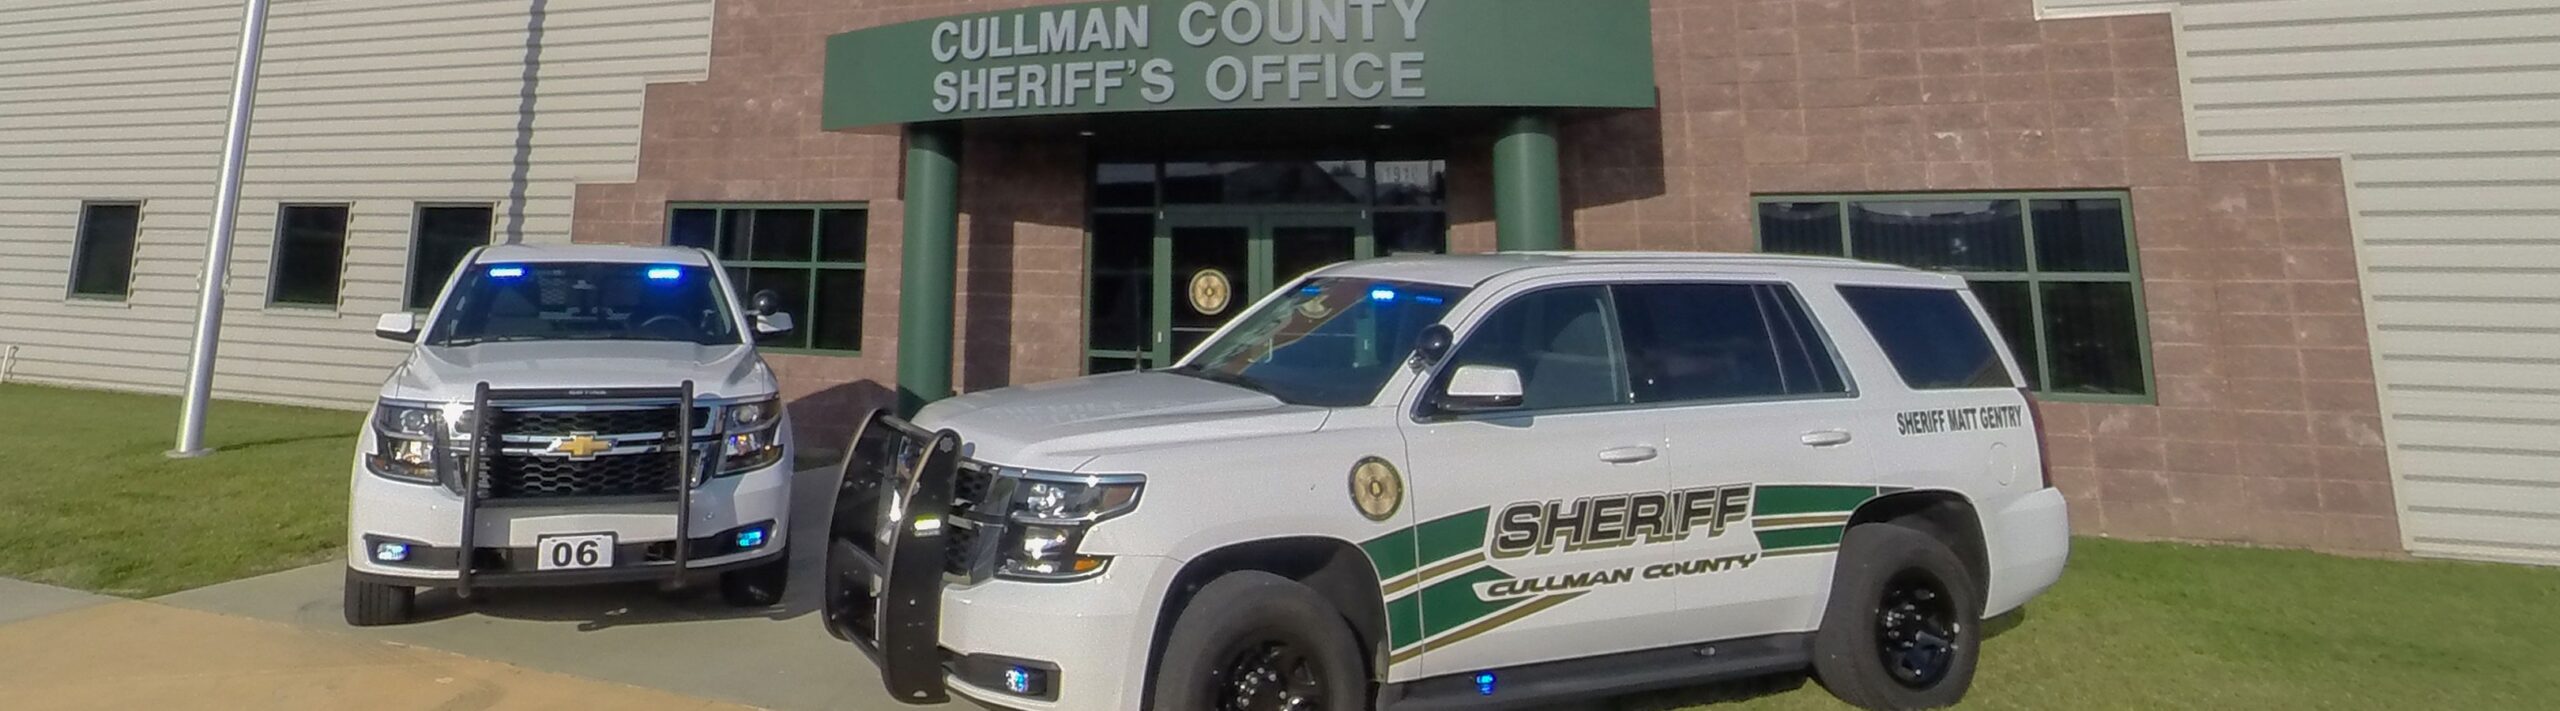 Cullman County Sheriff's Office 01